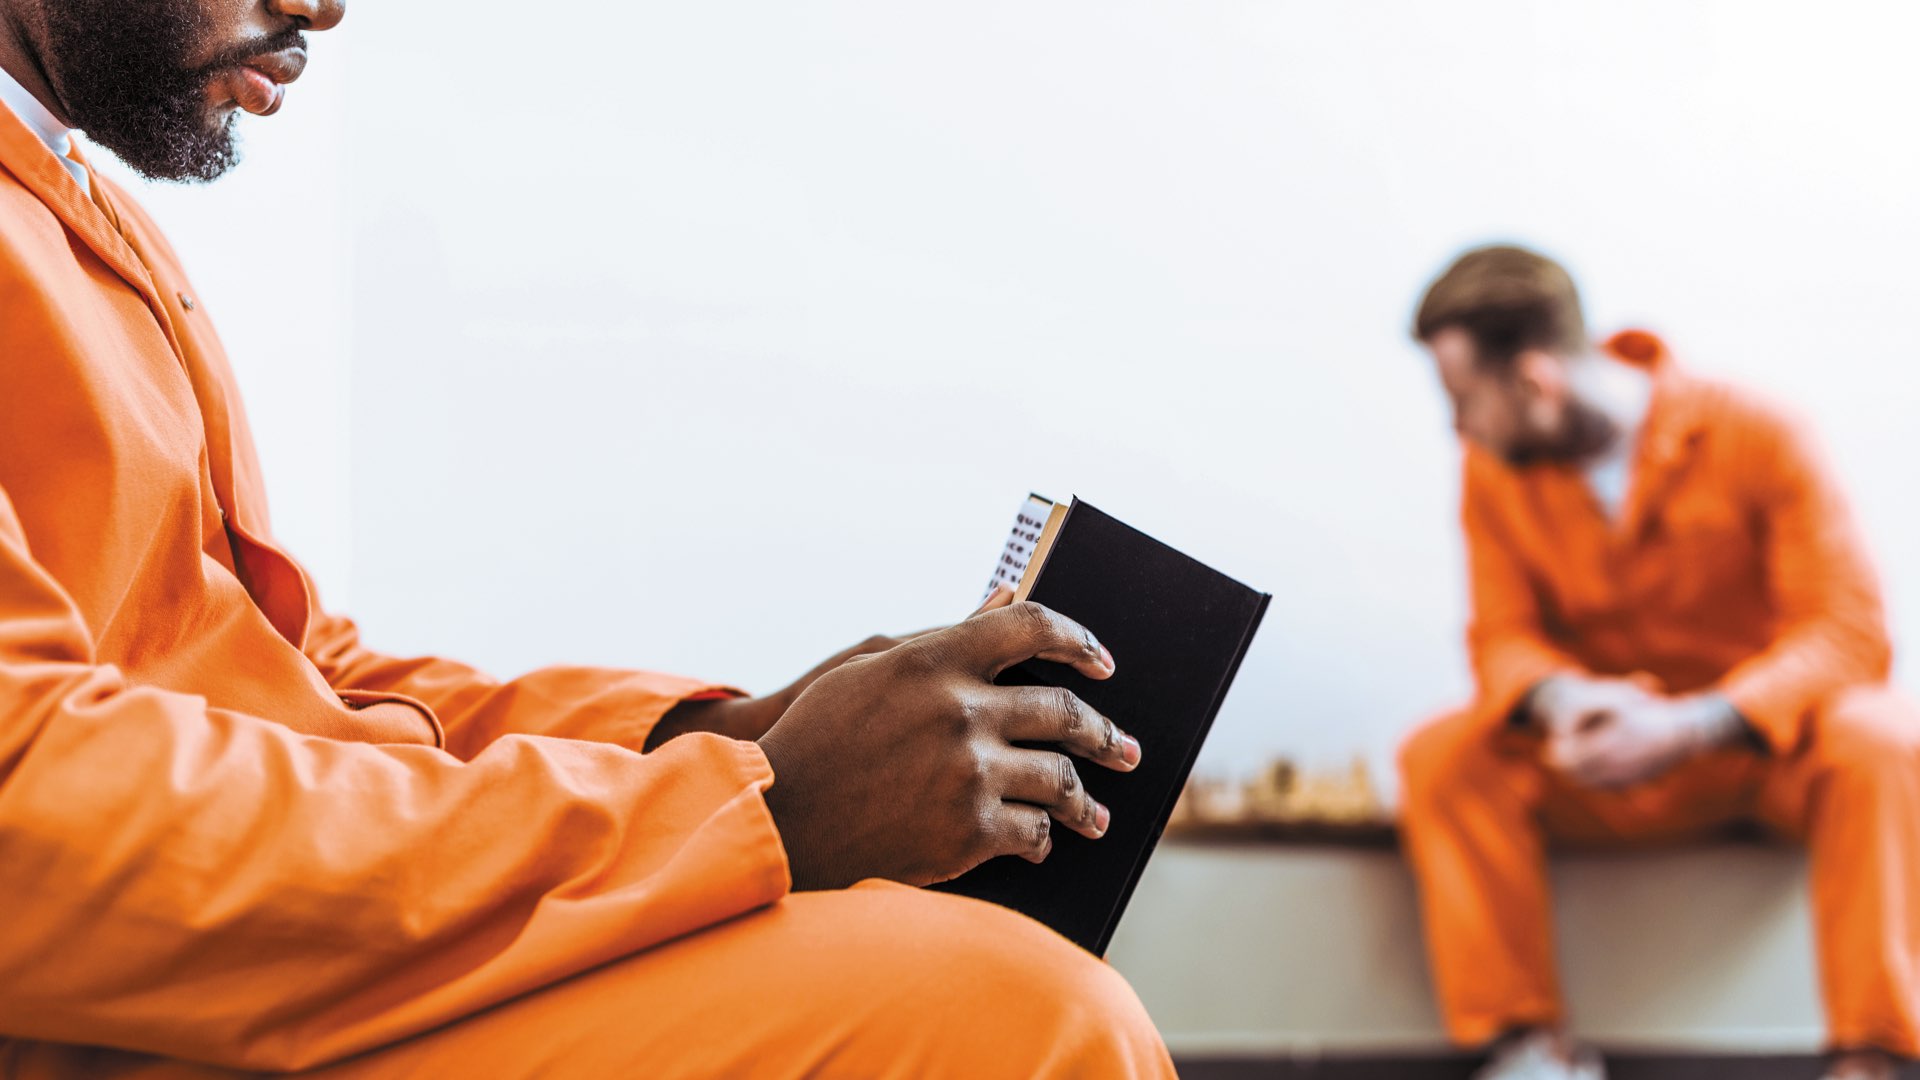 A prison inmate wearing an orange jumpsuit reading an open book with another inmate in the background 